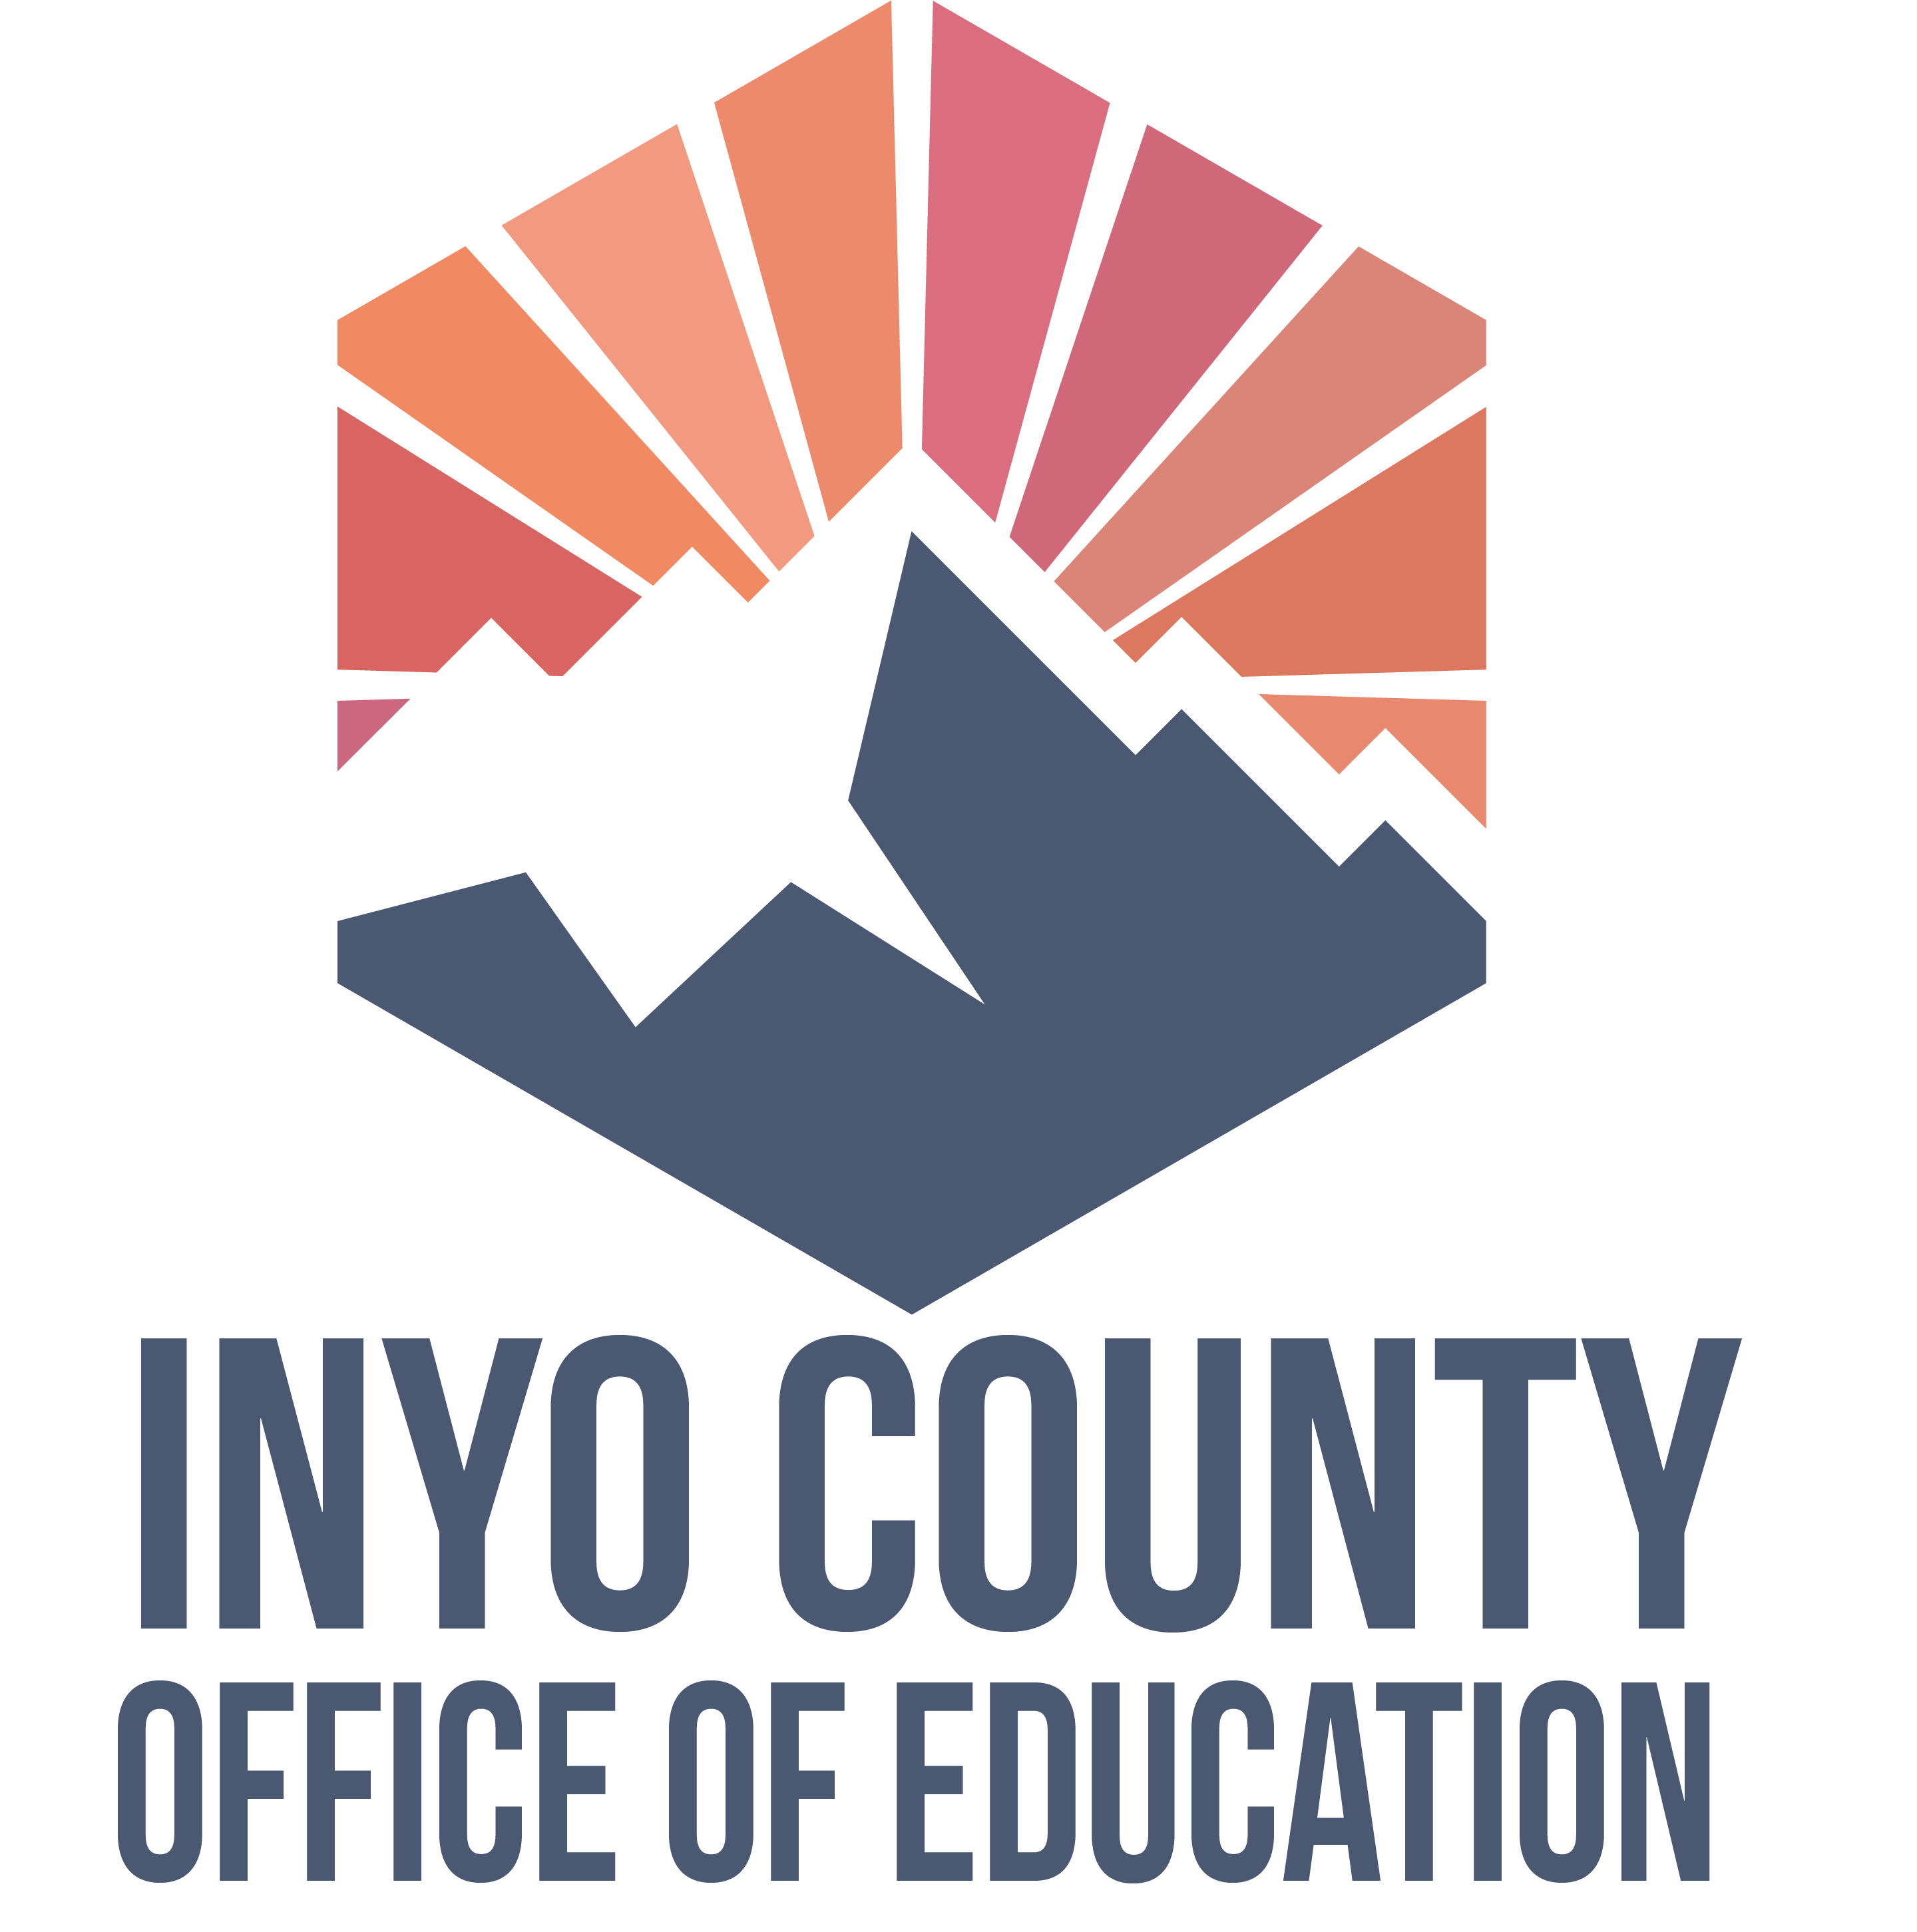 Logo for Inyo county superintendent of schools logo featuring a mountain with snow